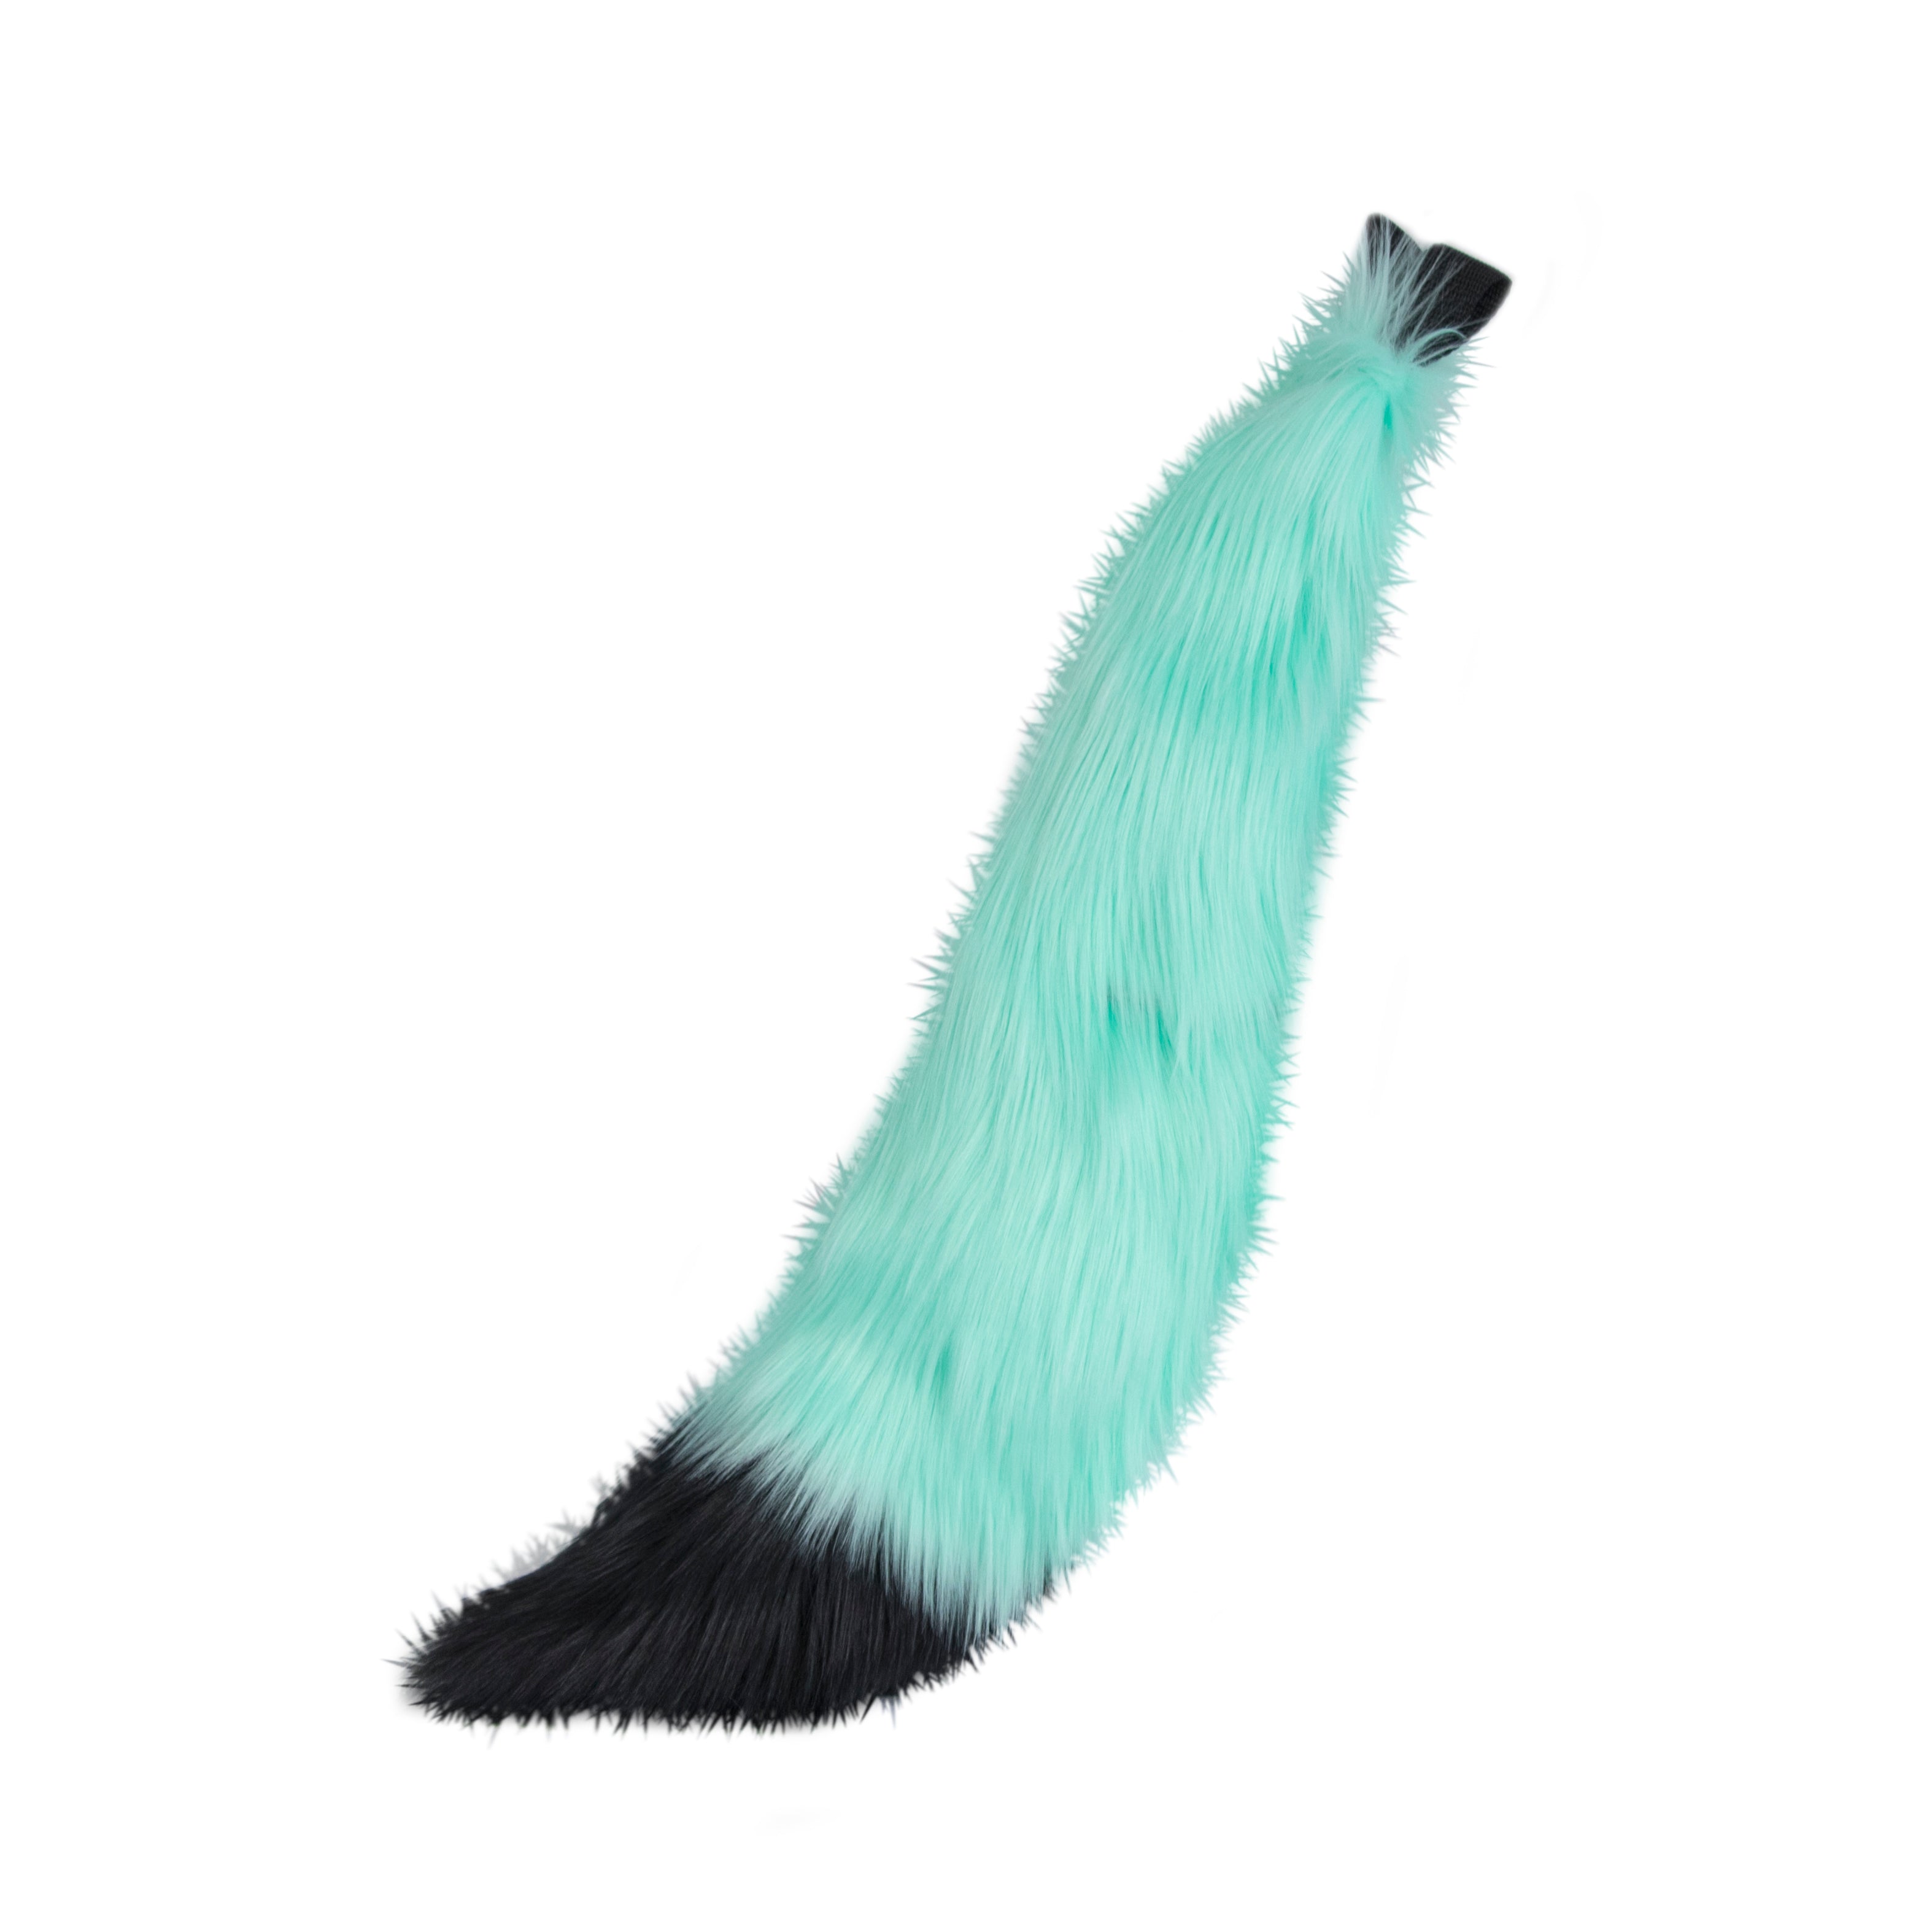 mint Pawstar fluffy furry costume mini fox tail. Great for Halloween, Parties, and more.